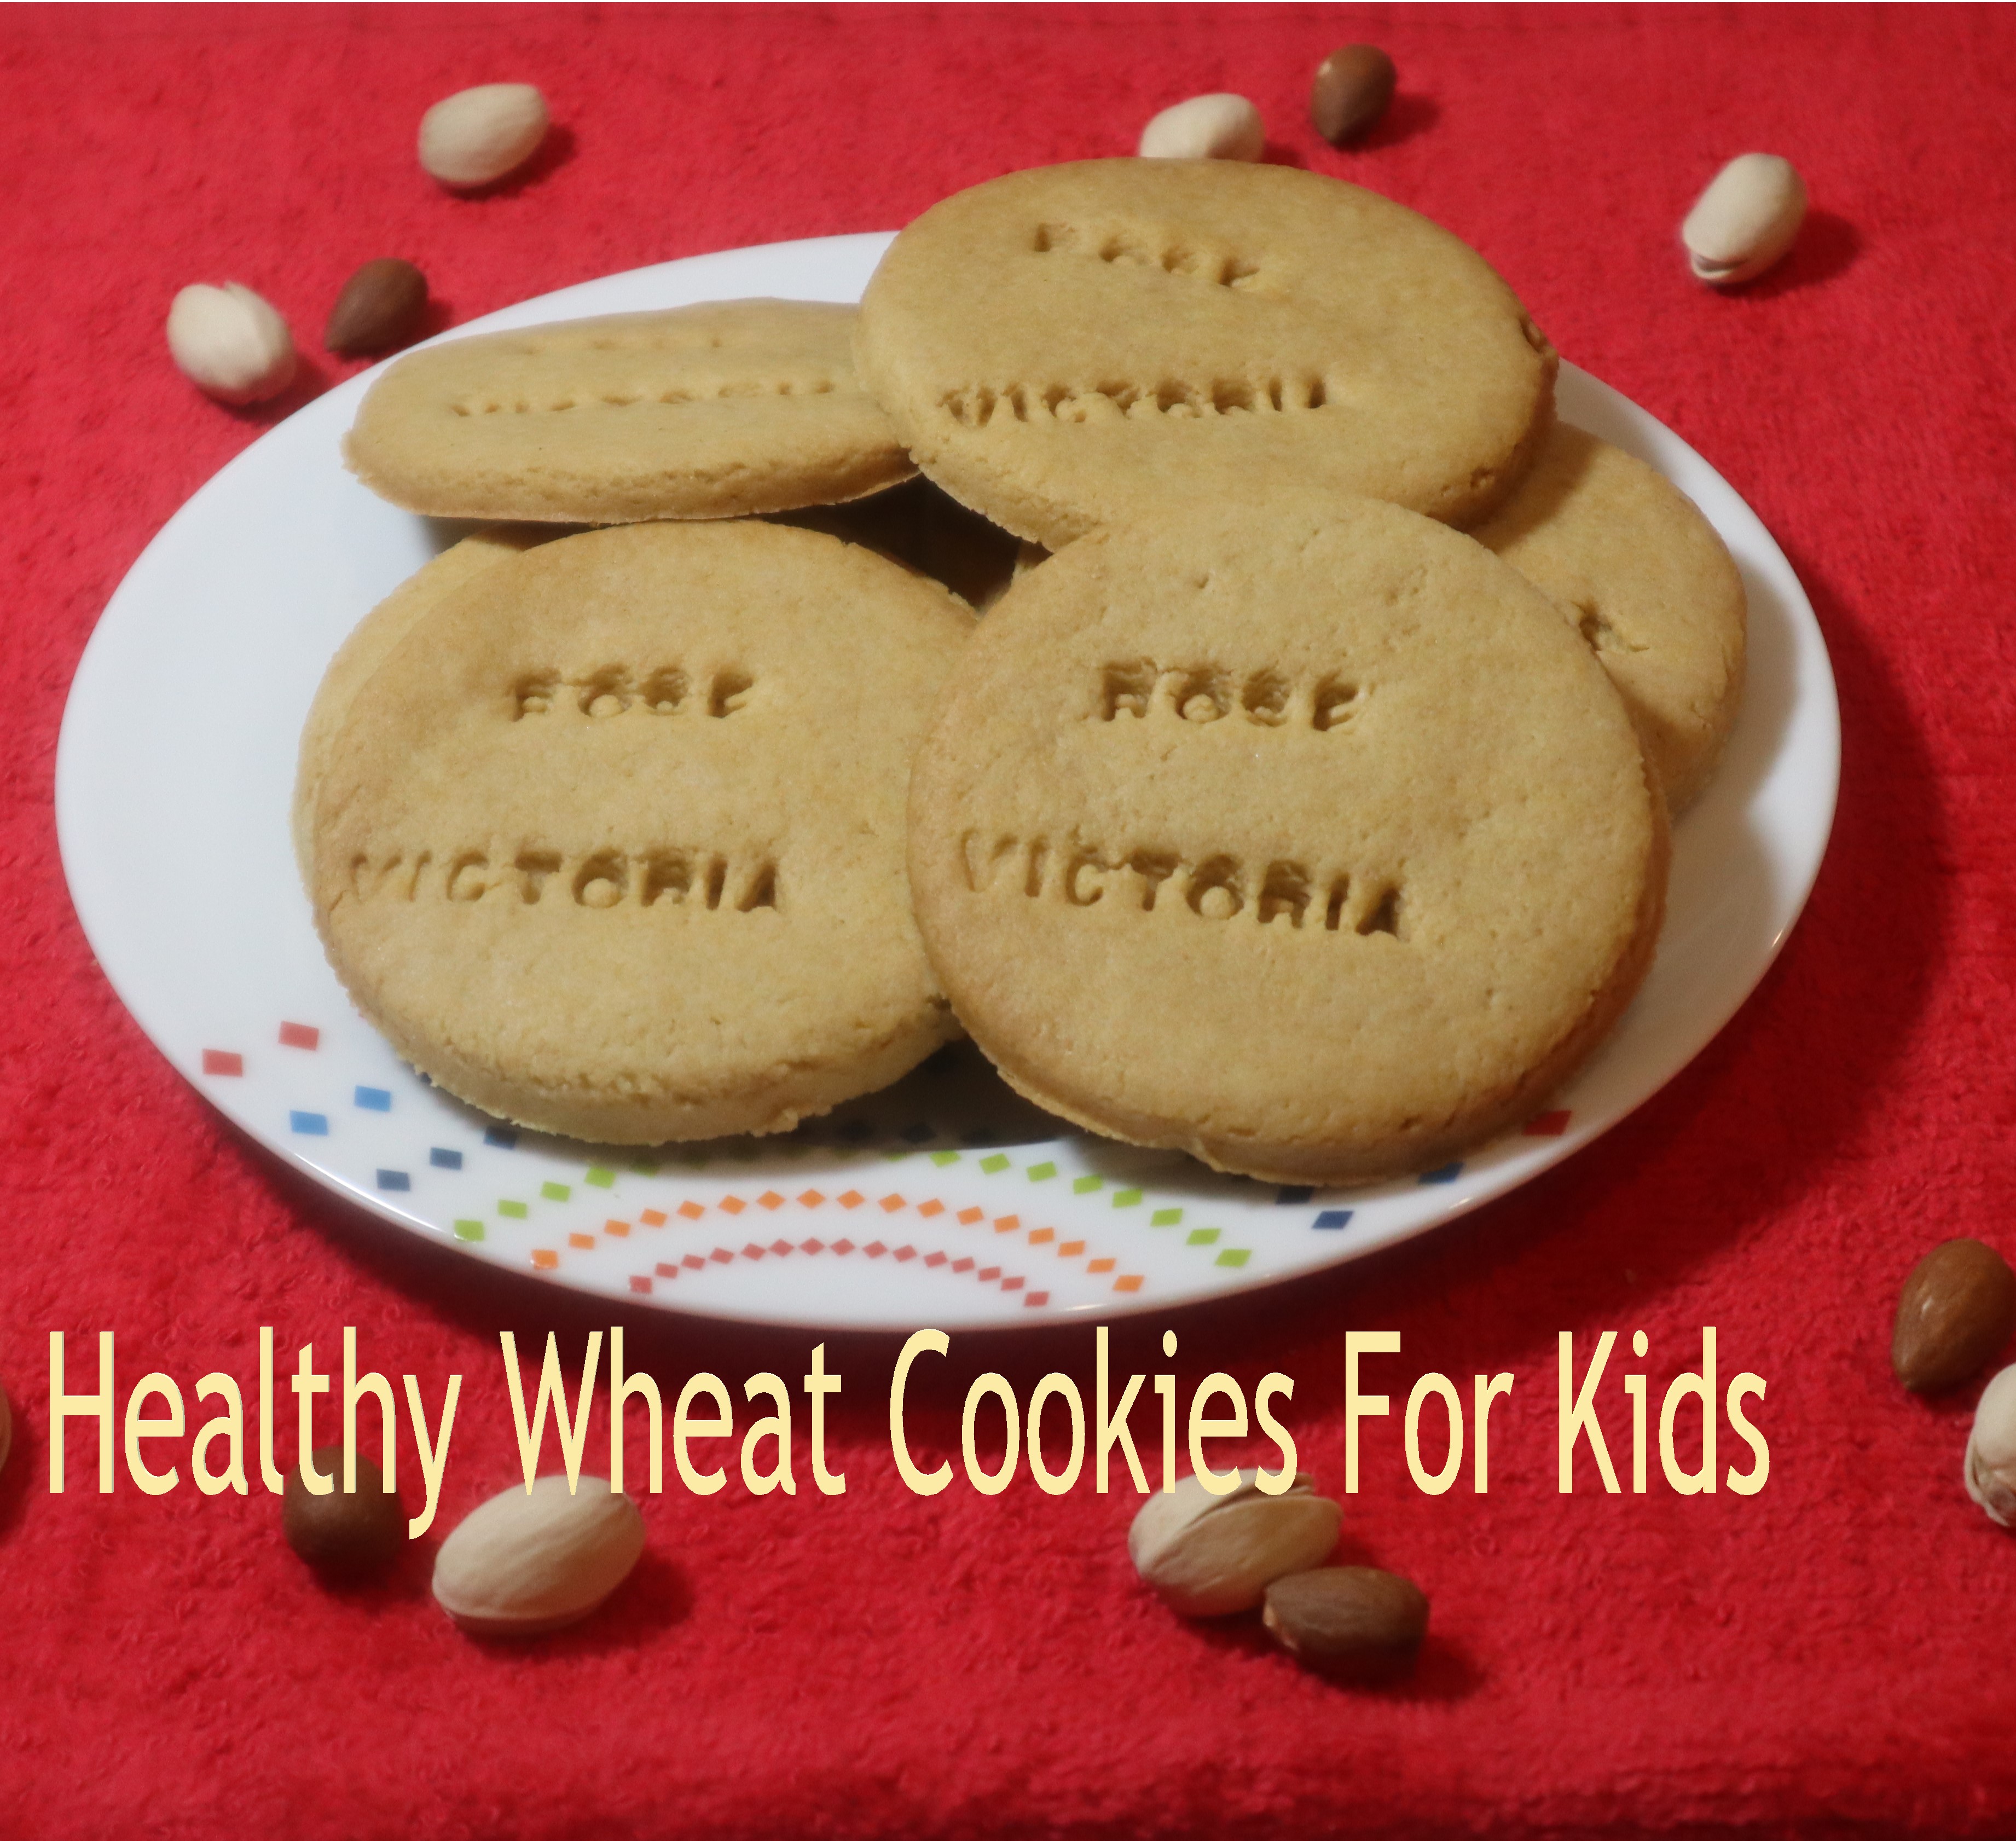 Whole wheat cookies for kids